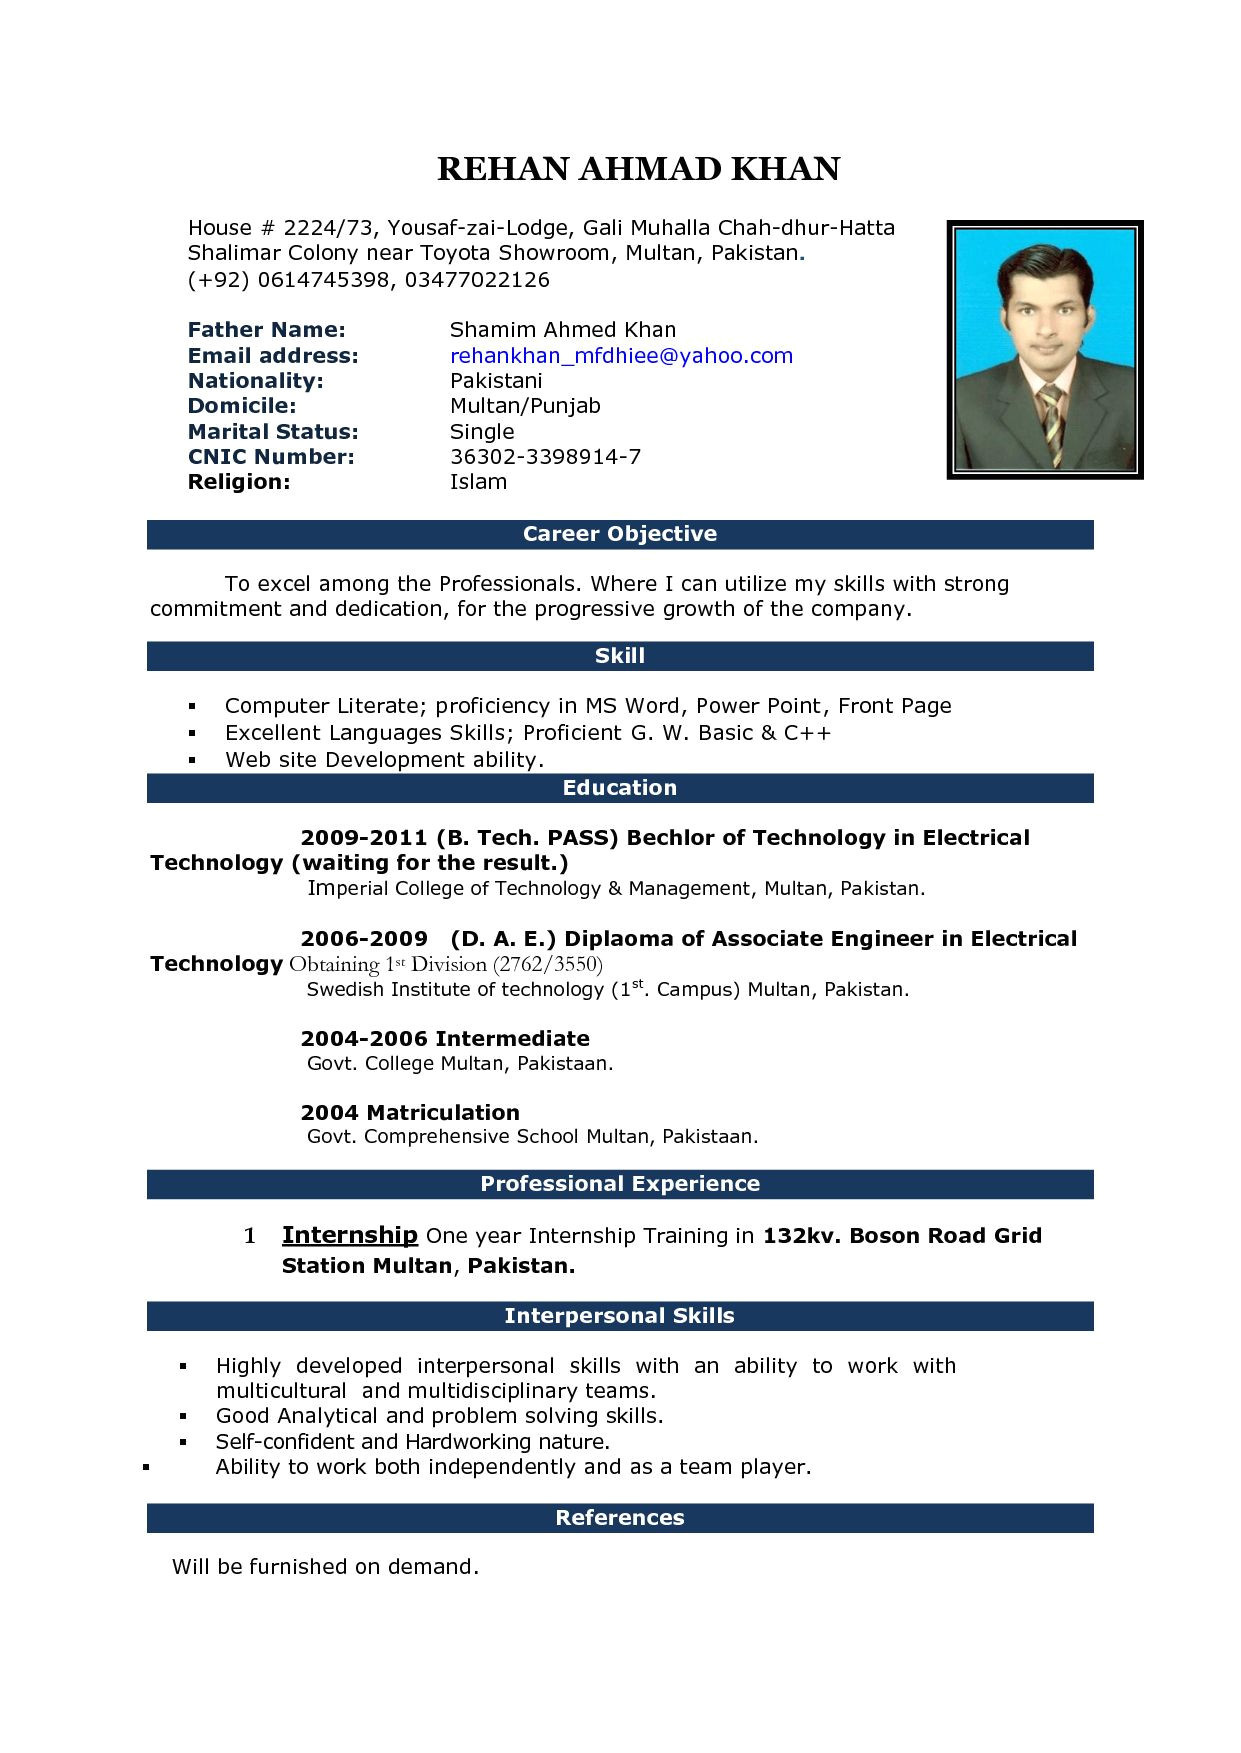 Sample Resume Download In Ms Word Latest Resume format In Ms Word